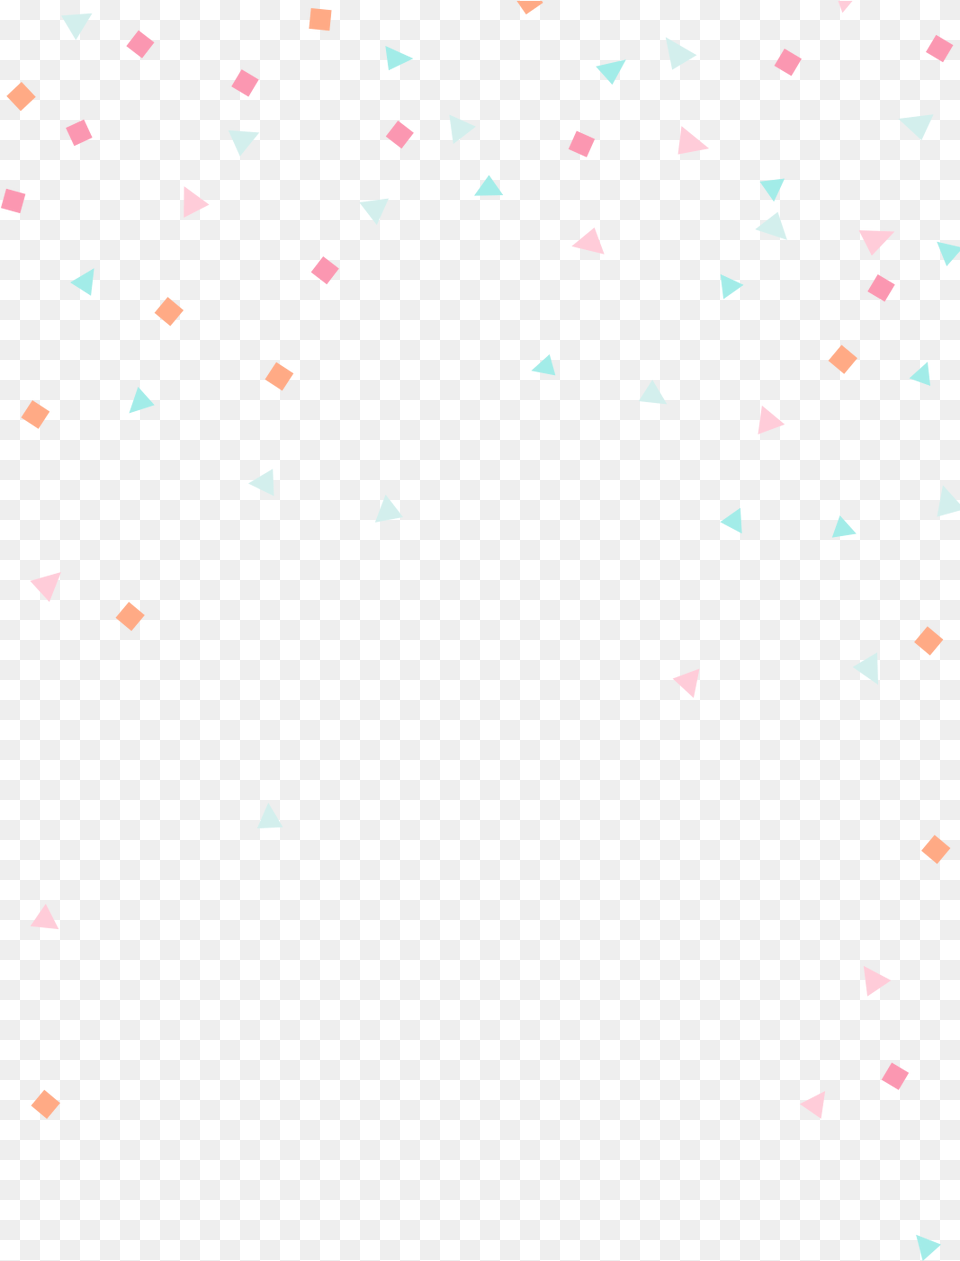 Download And Use Snapchat Filters Clipart Pattern, Paper, Confetti, Texture Png